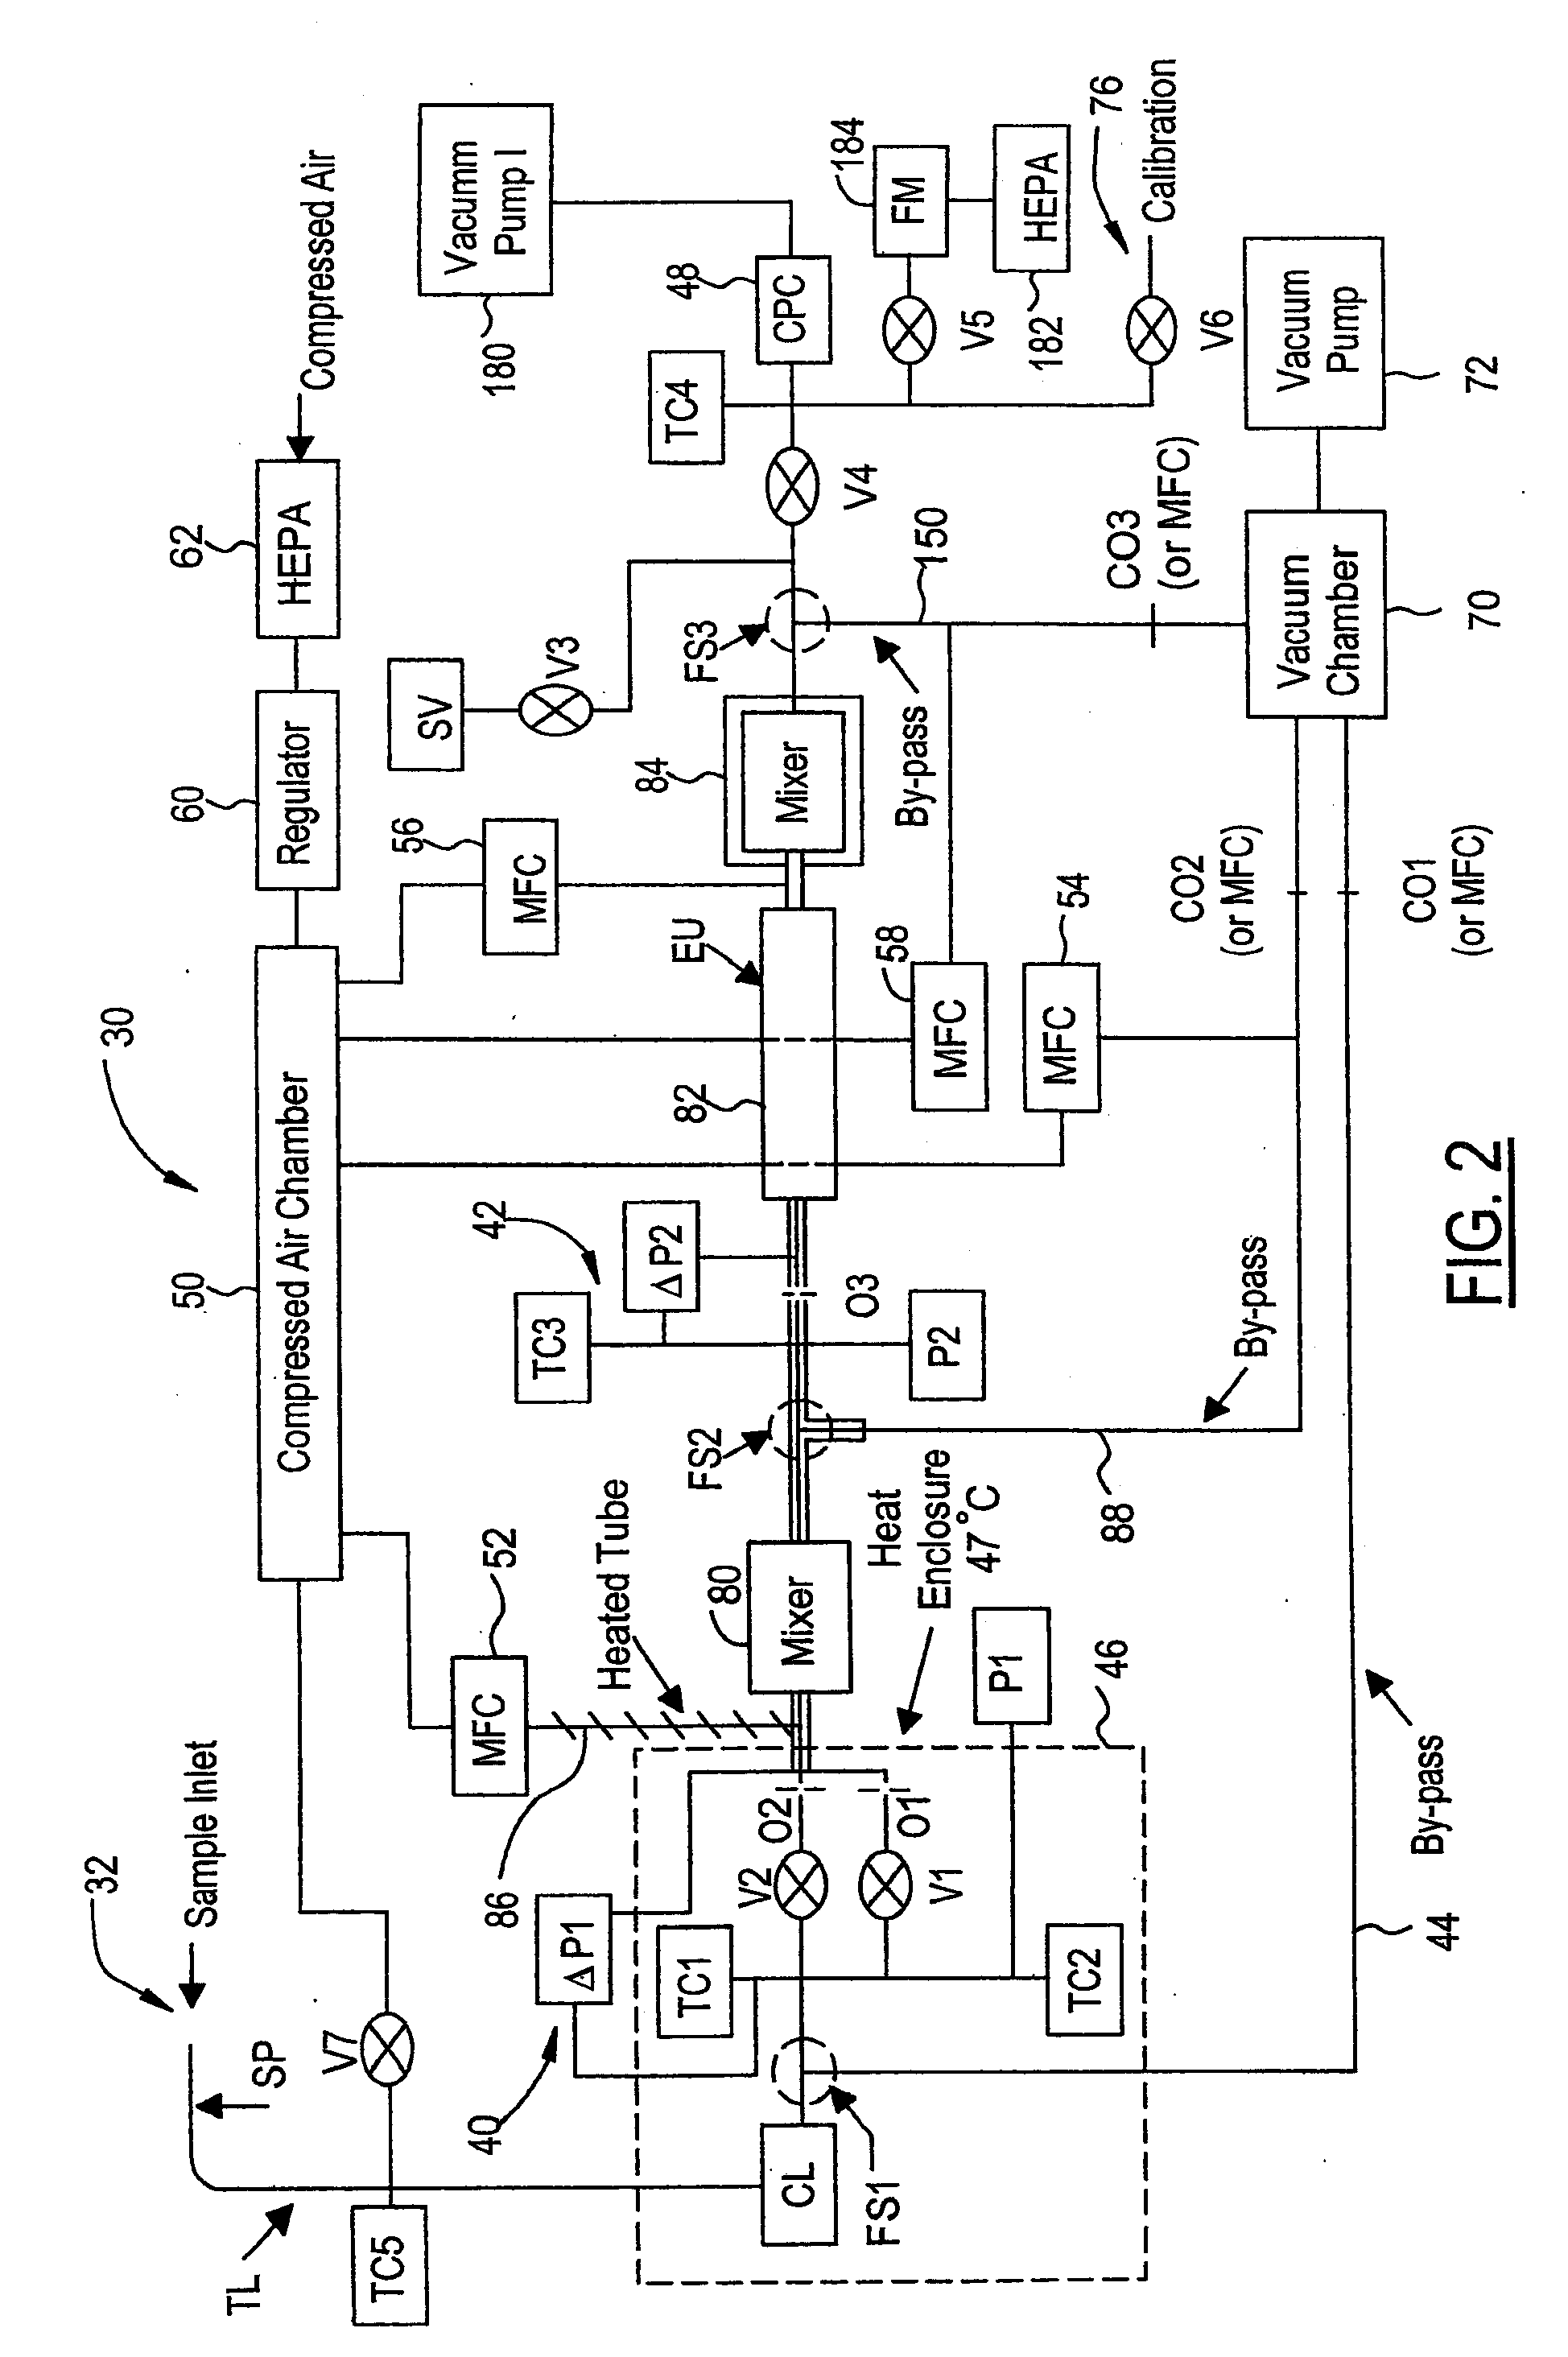 Solid particle counting system with flow meter upstream of evaporation unit